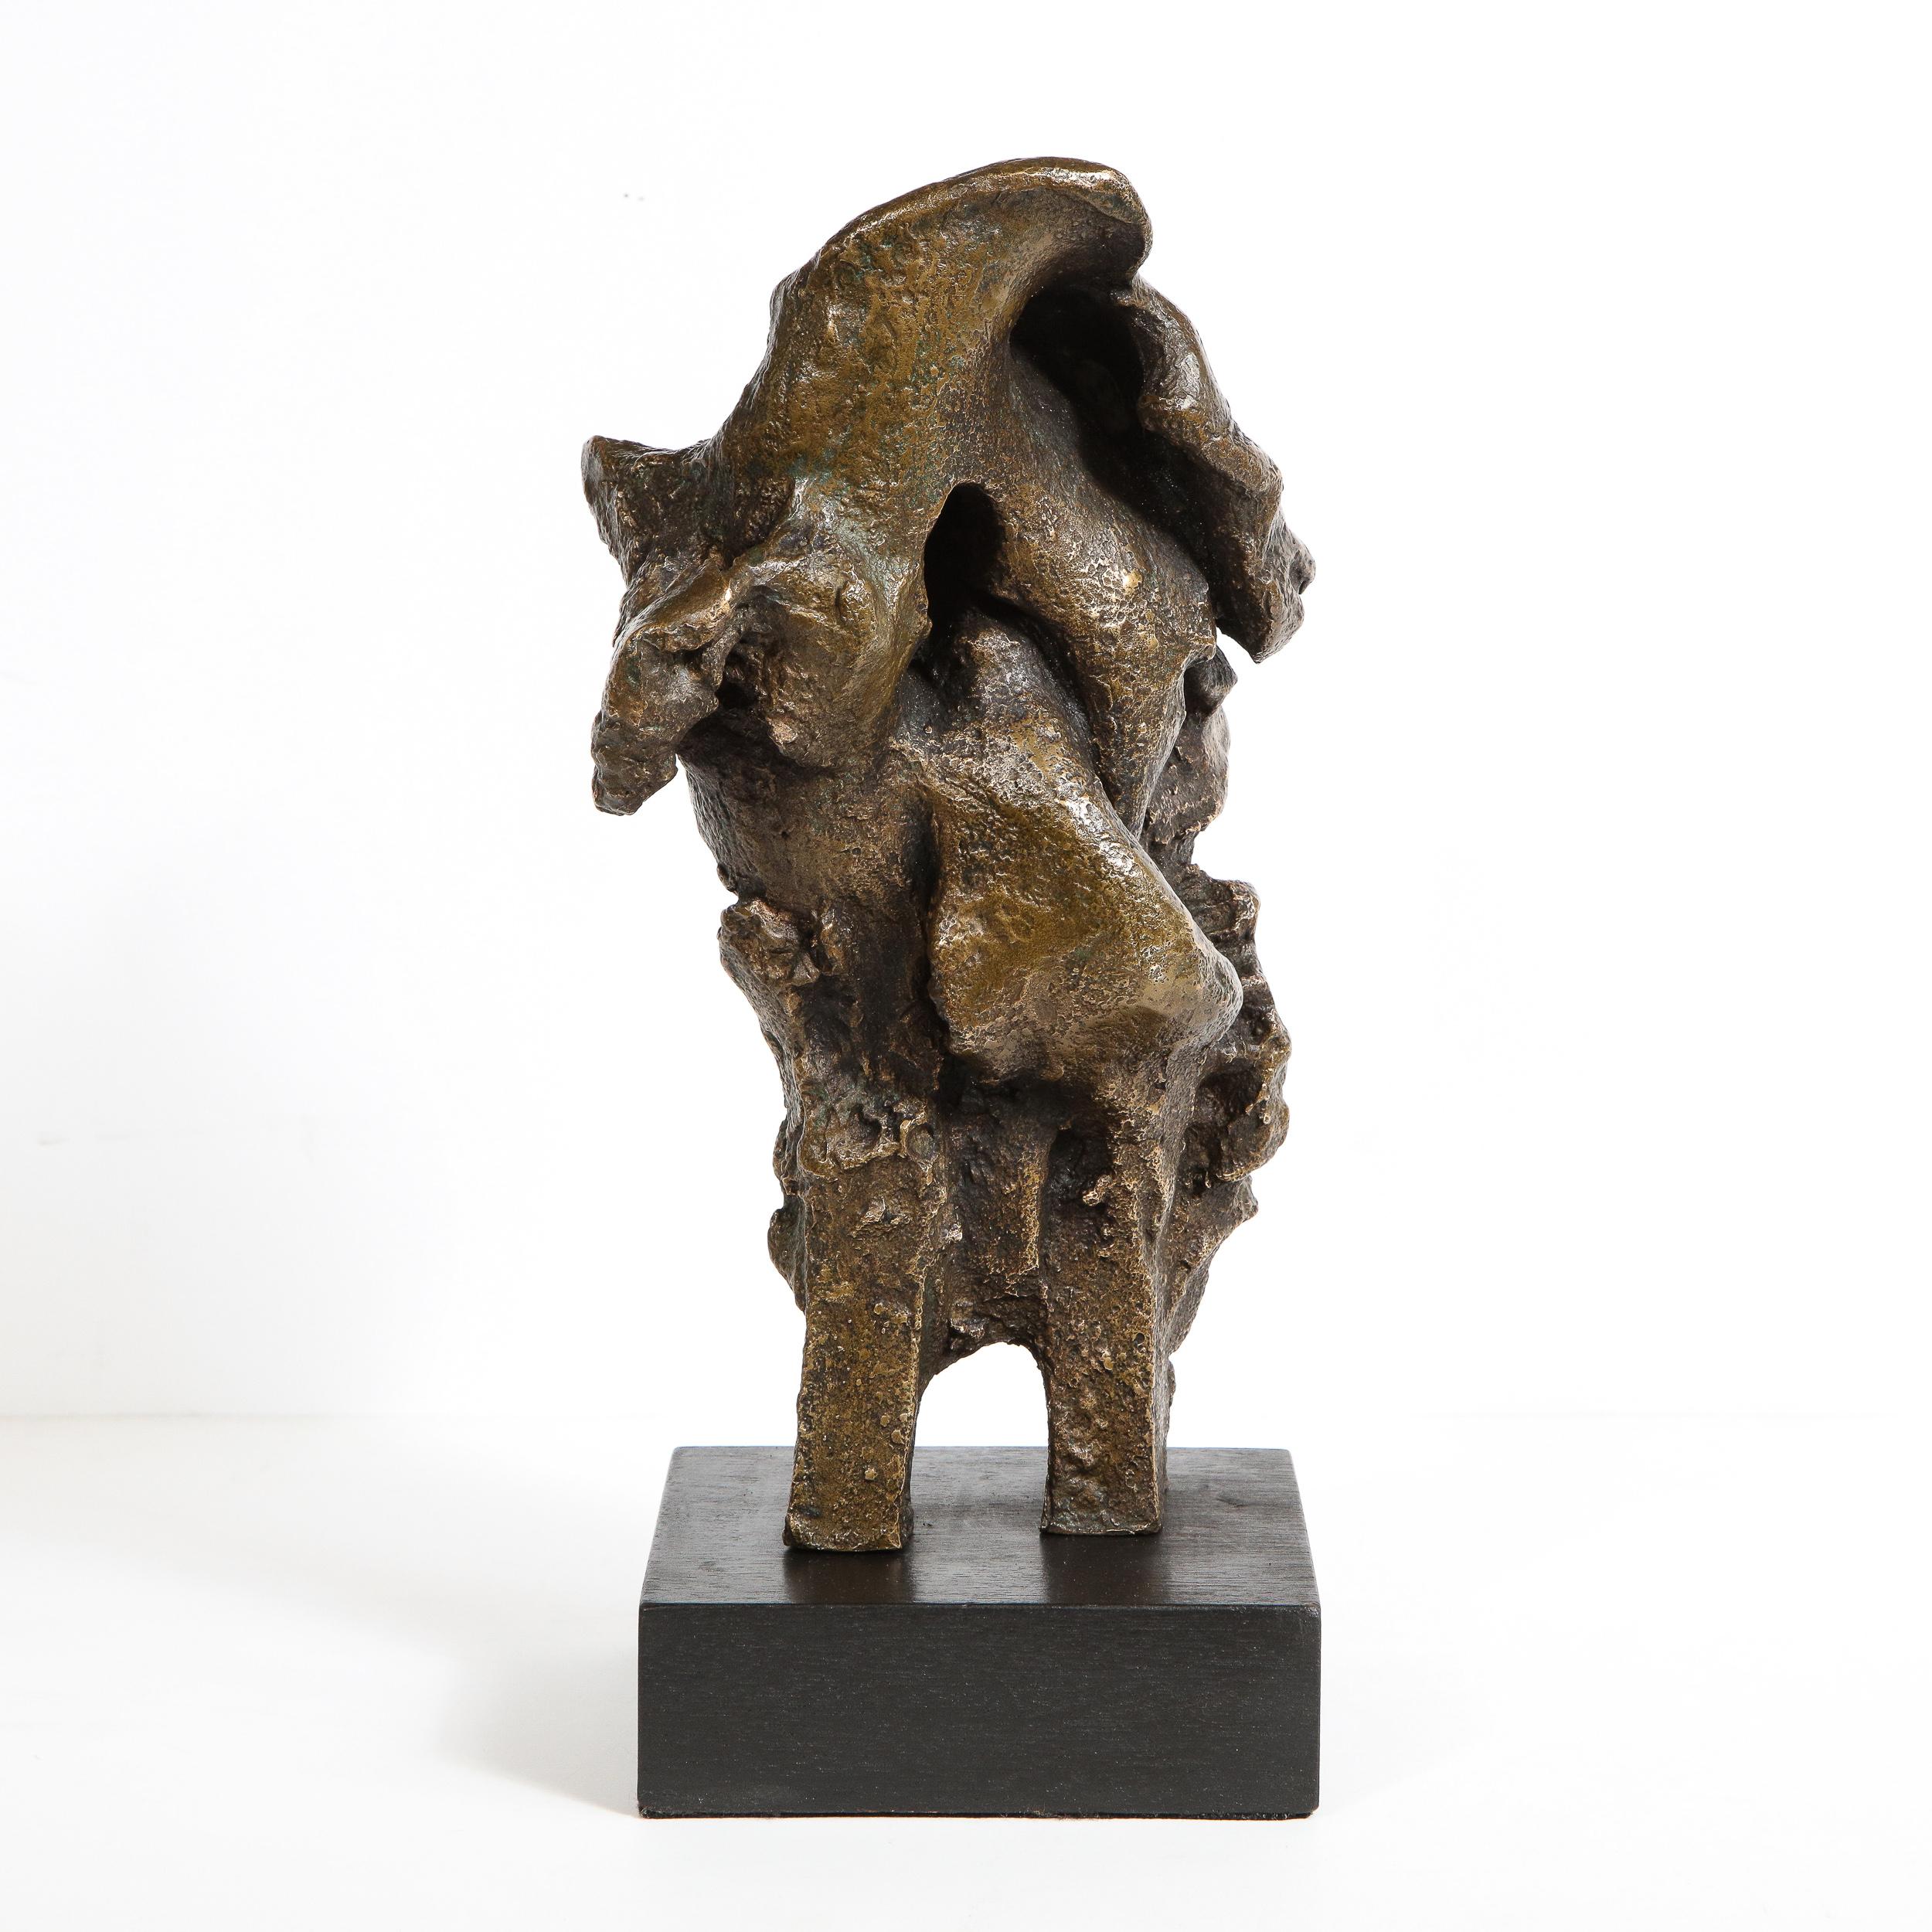 This refined Mid-Century Modern sculpture was realized in 1960. Presented on a volumetric rectangular ebonized wood base, the piece features an abundance of intermingling organic forms- full of verve and dynamism- with a richly textural surface.